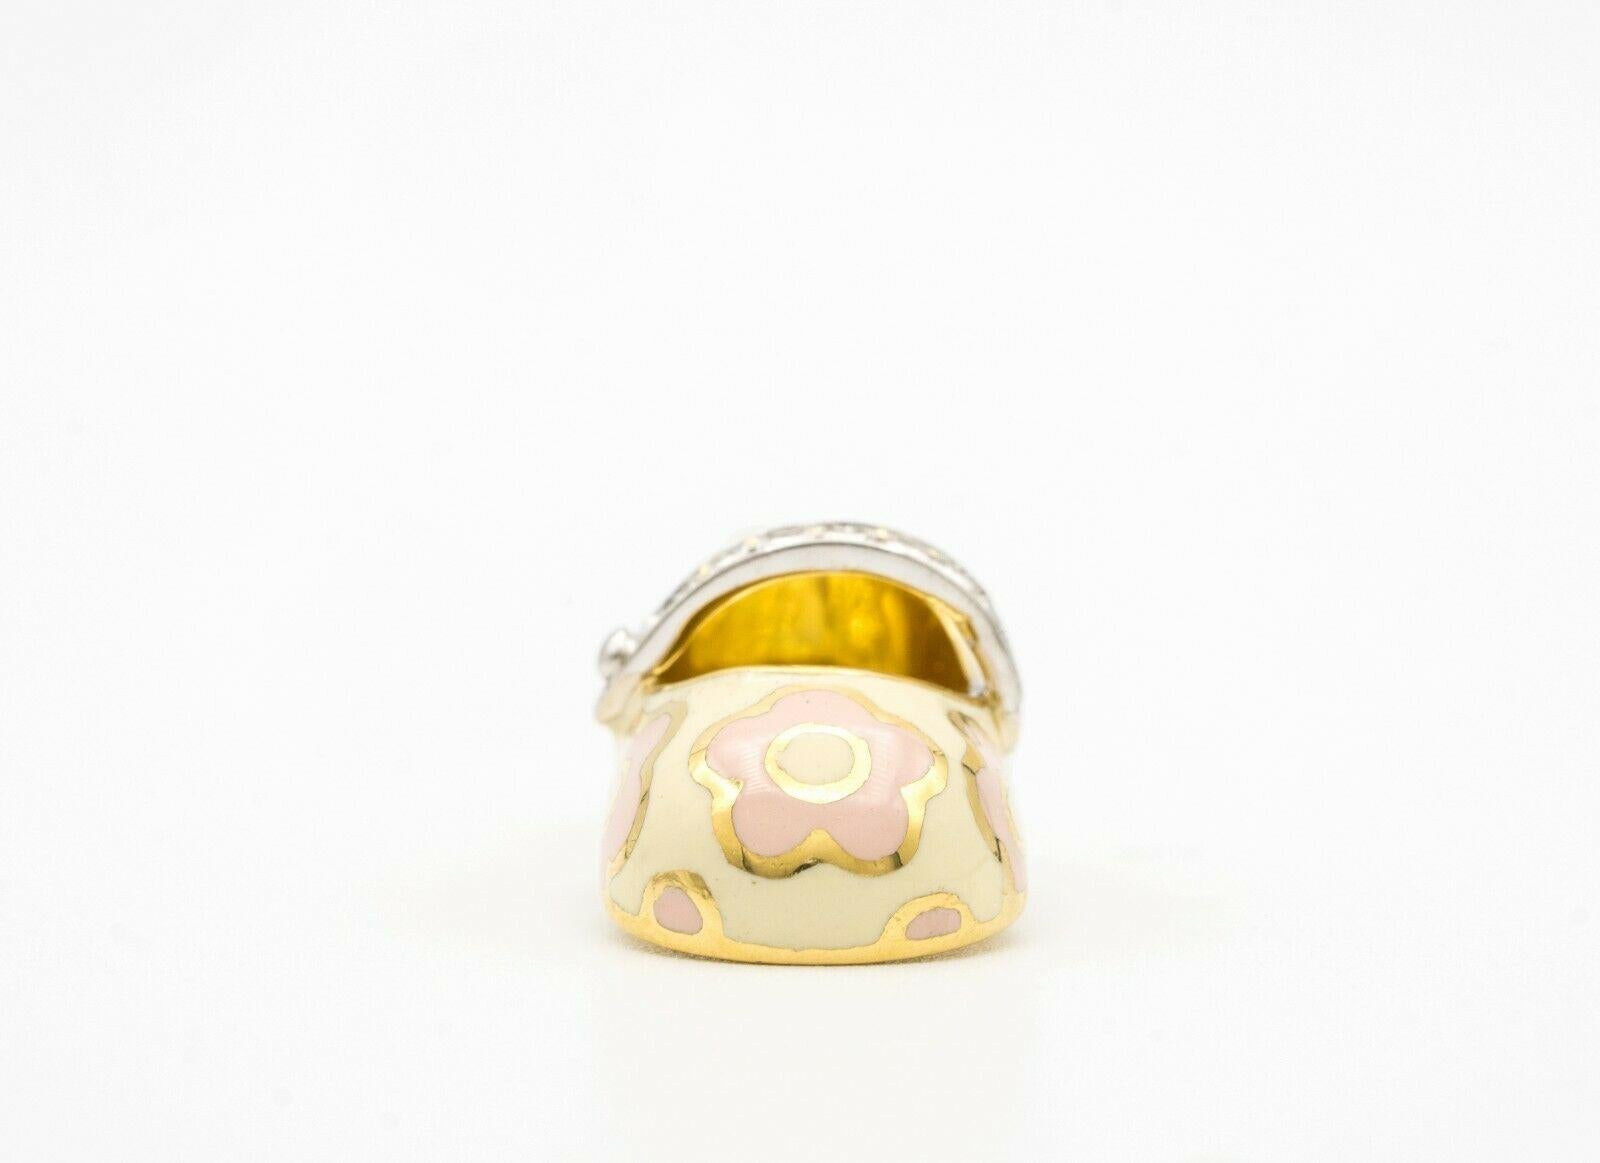 Contemporary Aaron Basha Pink Clove Diamond Strap Baby Shoe Charm in 18K Yellow Gold'